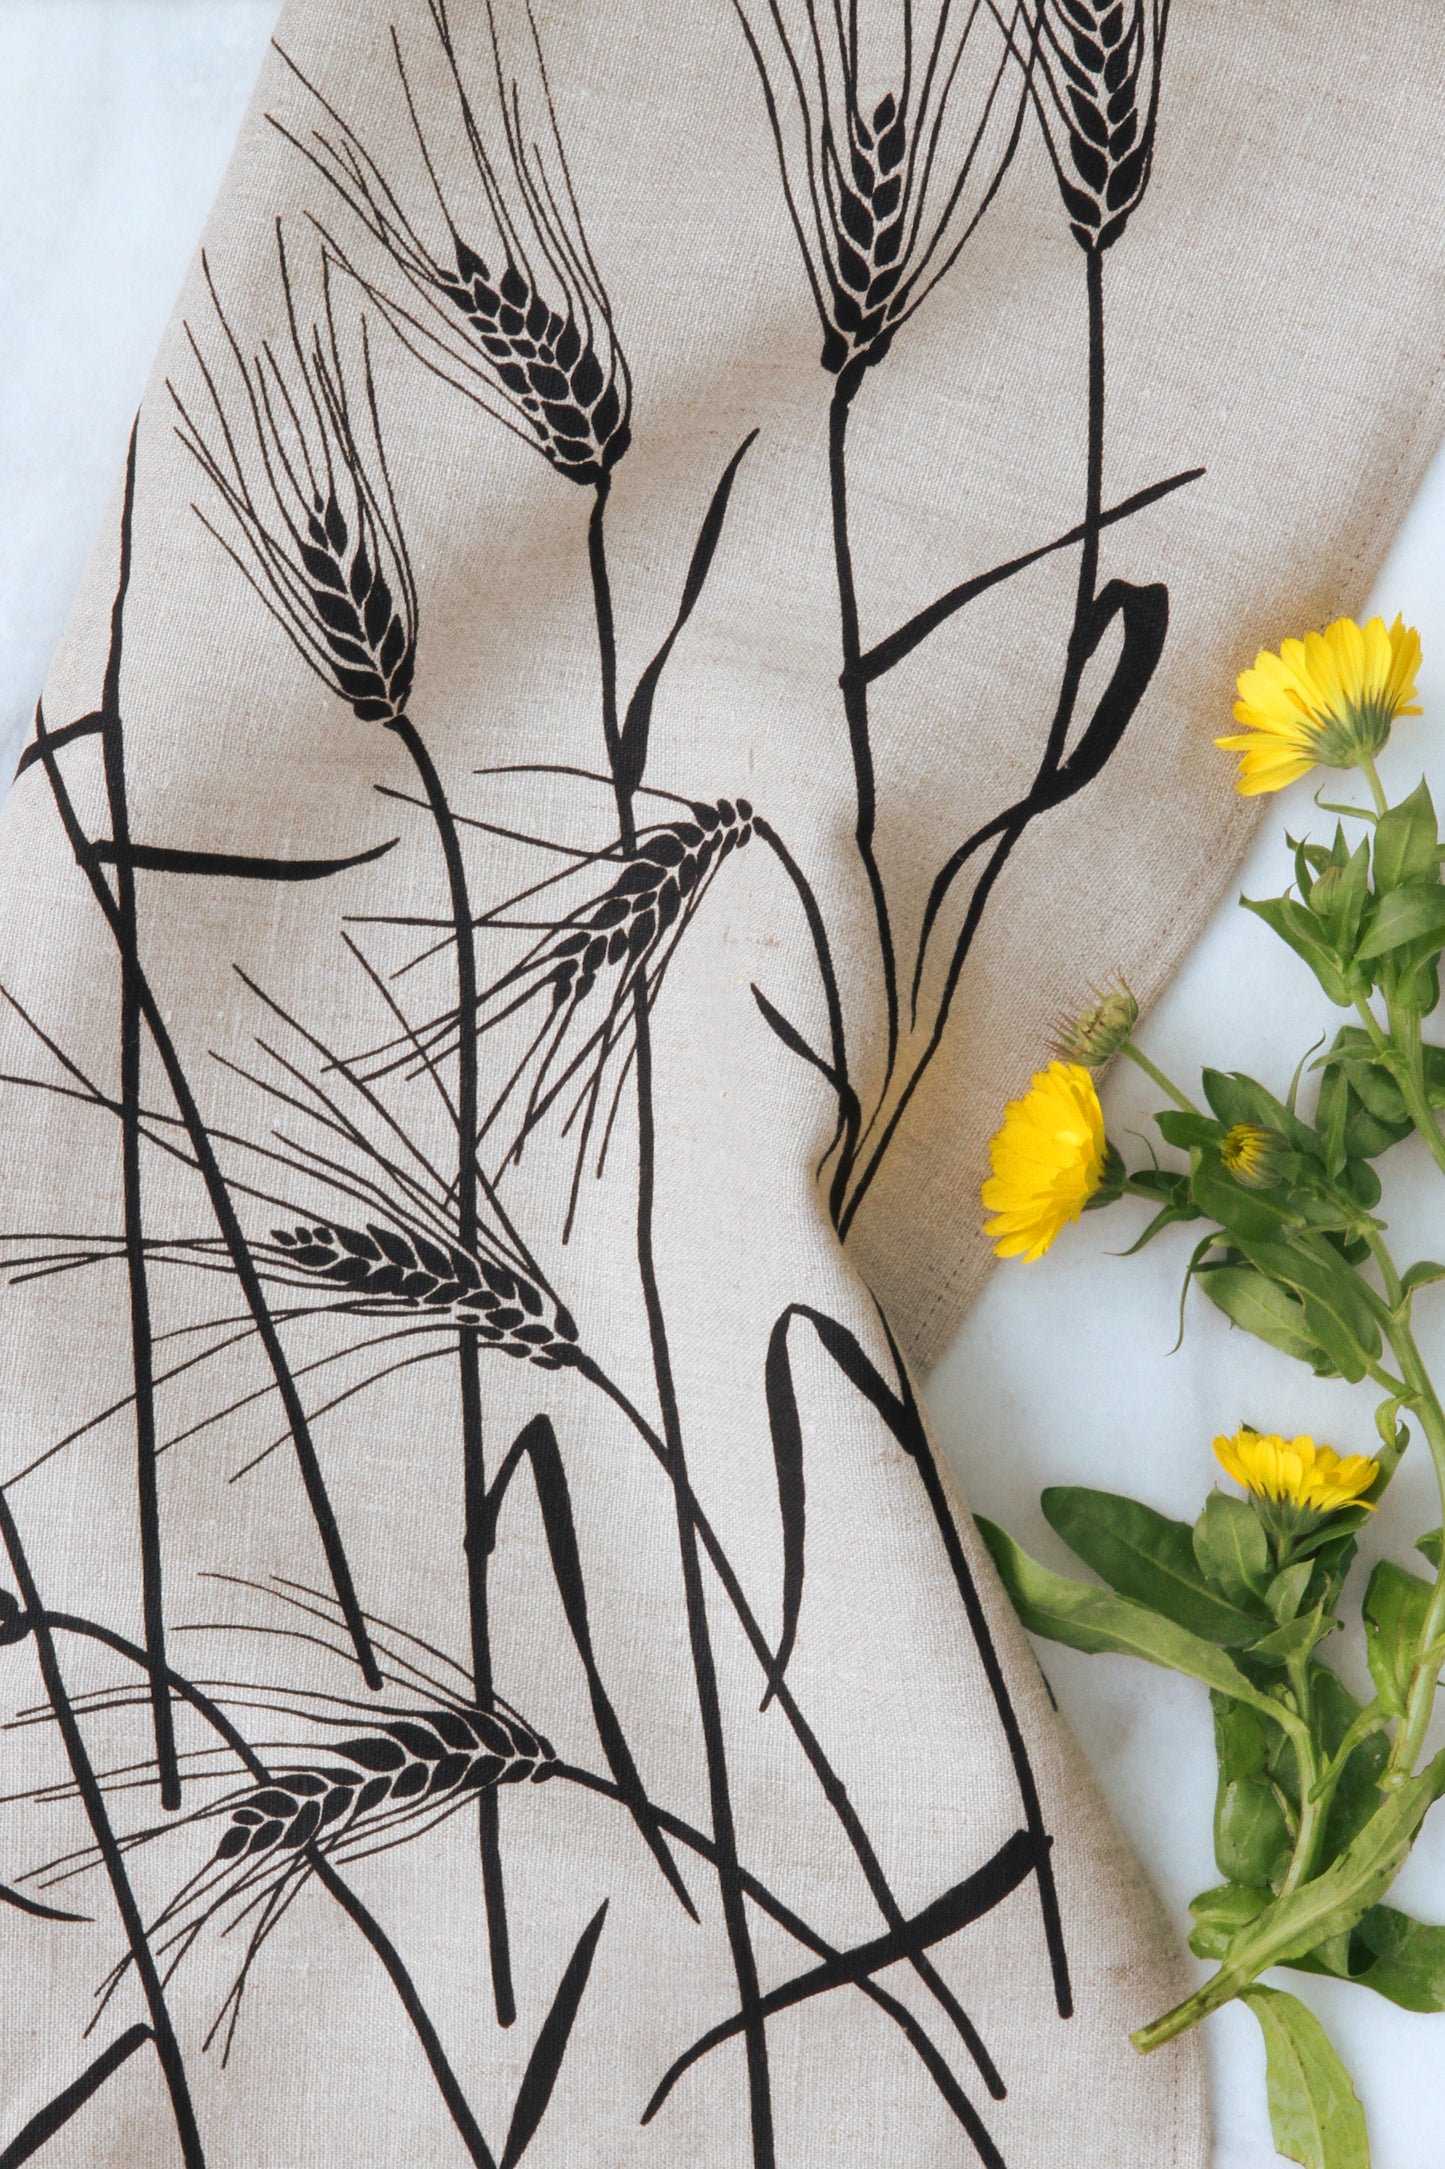 Wheat Kitchen Towel in Black on Natural Linen